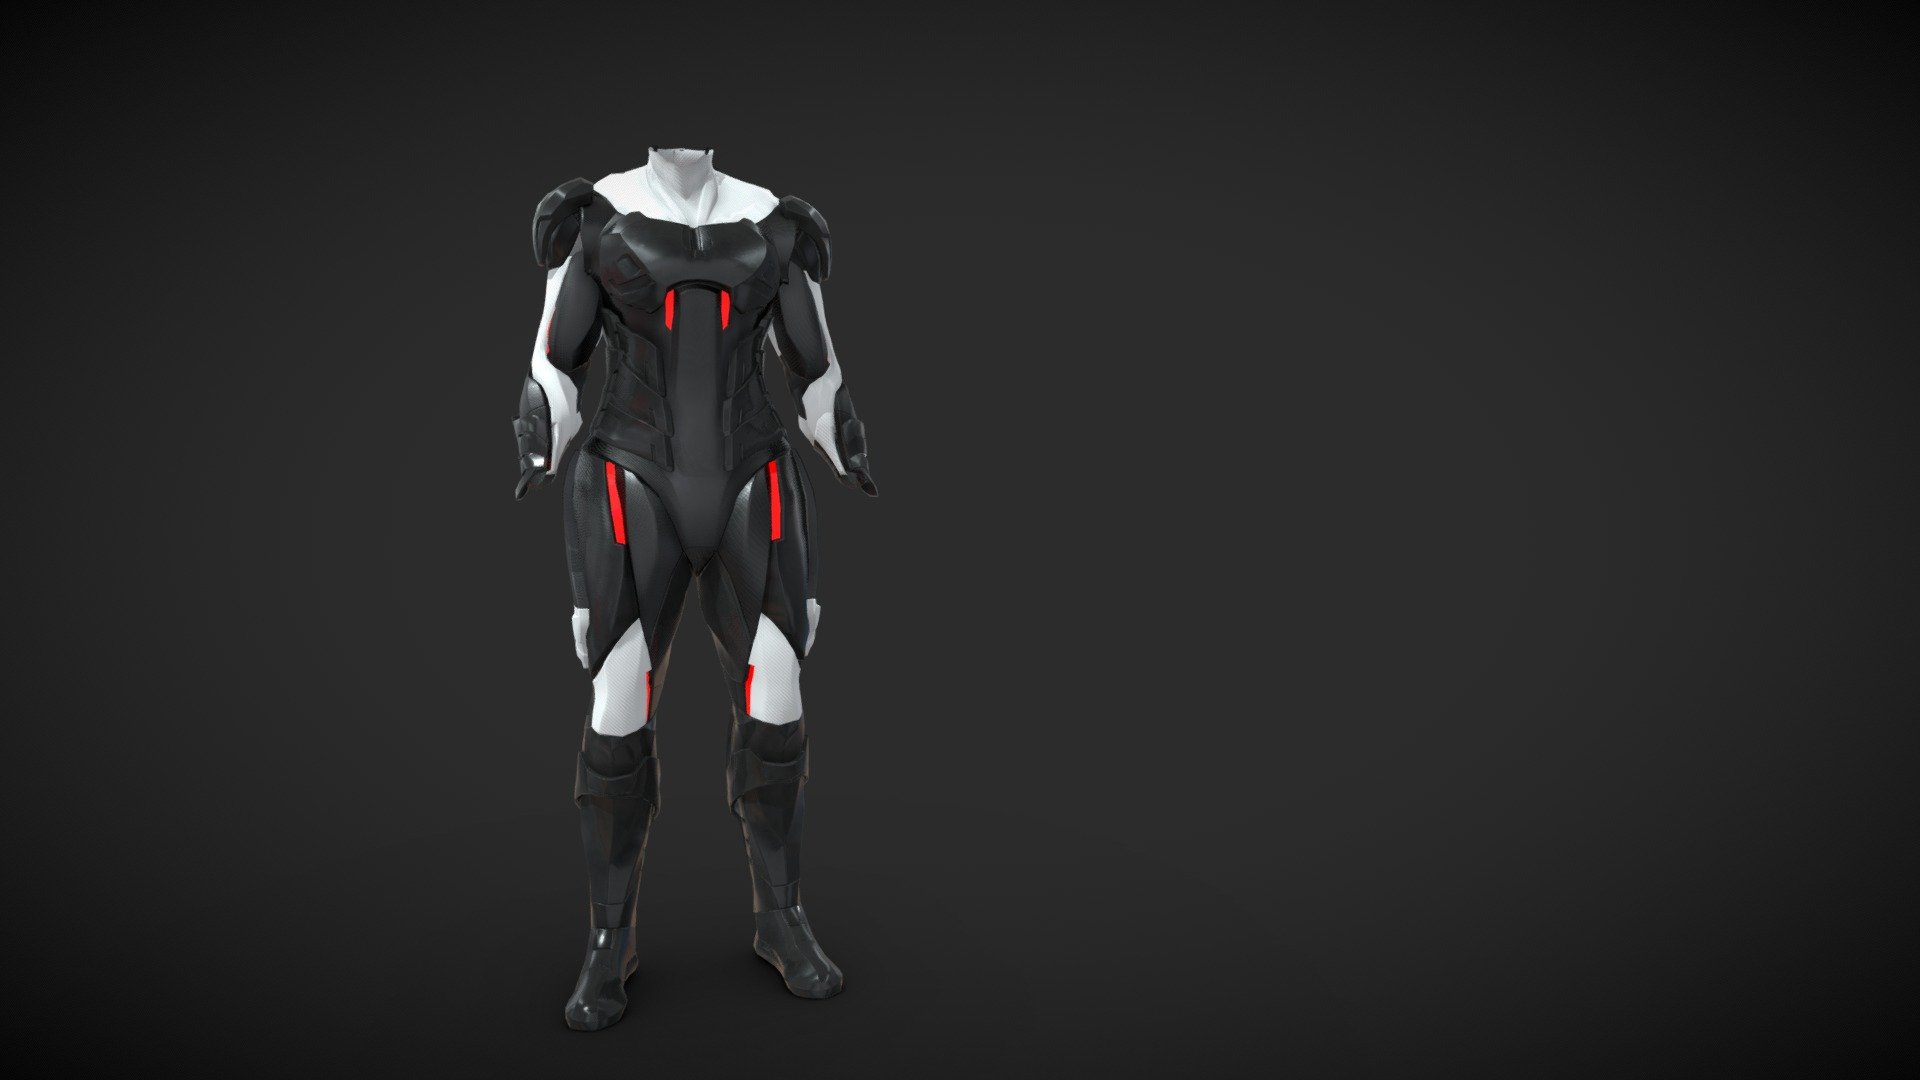 Cyborg carbon body armor.

This is a Low Poly PBR model.

Polycount:

Tris: 56994
Verts: 32574

The model comes in an A-Pose ready to be rigged, and at the pose seen on this post.
Texture sets are .png at 2048 resolution. 
PBR Metallic/Roughness based:
Plate Armor Clothing 3d model